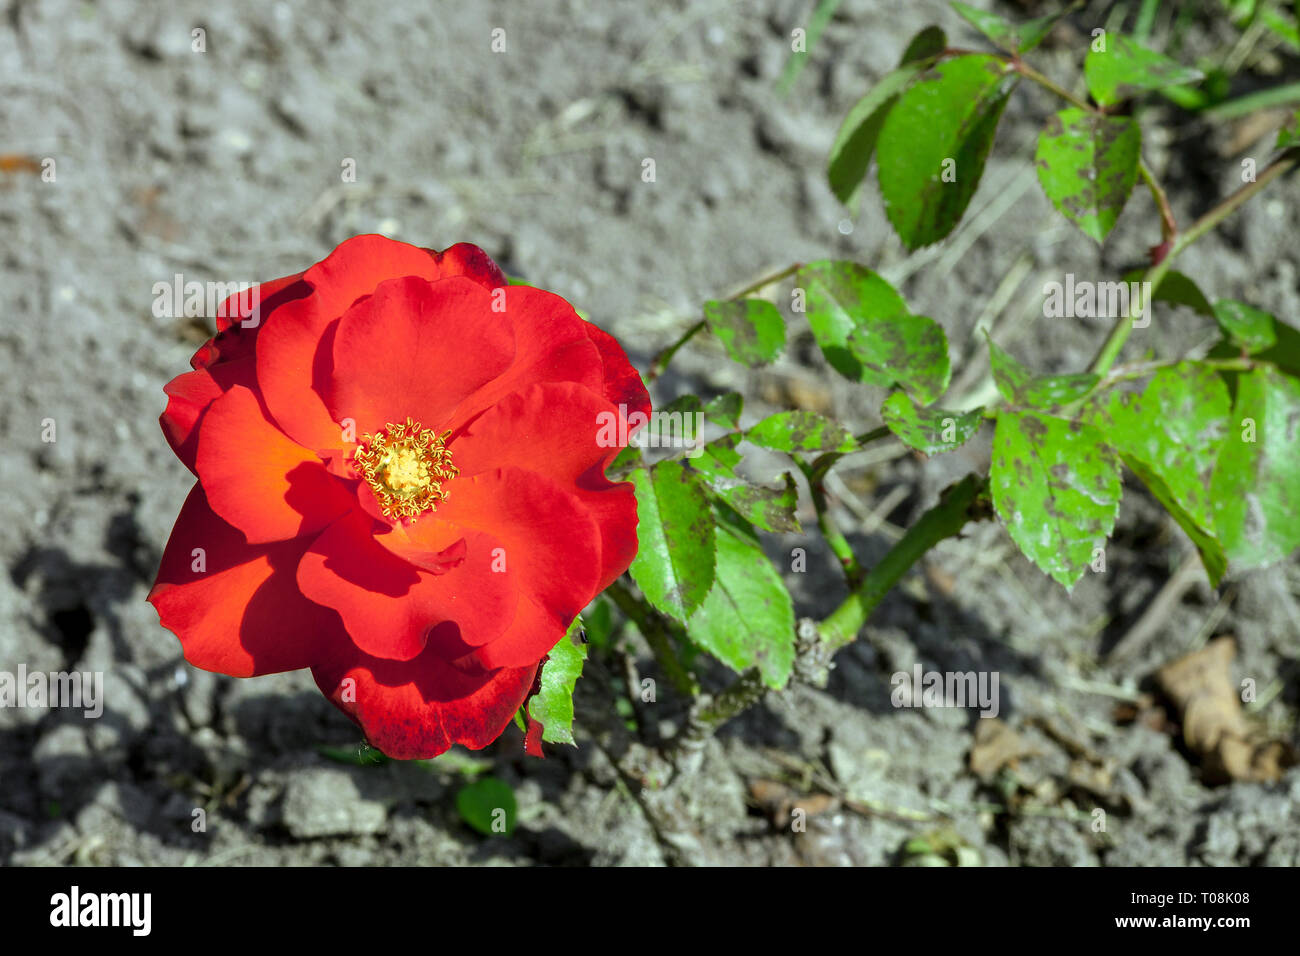 Red rose growing in summer garden, top view. Diseases leaves spot Cercospora on plant Stock Photo